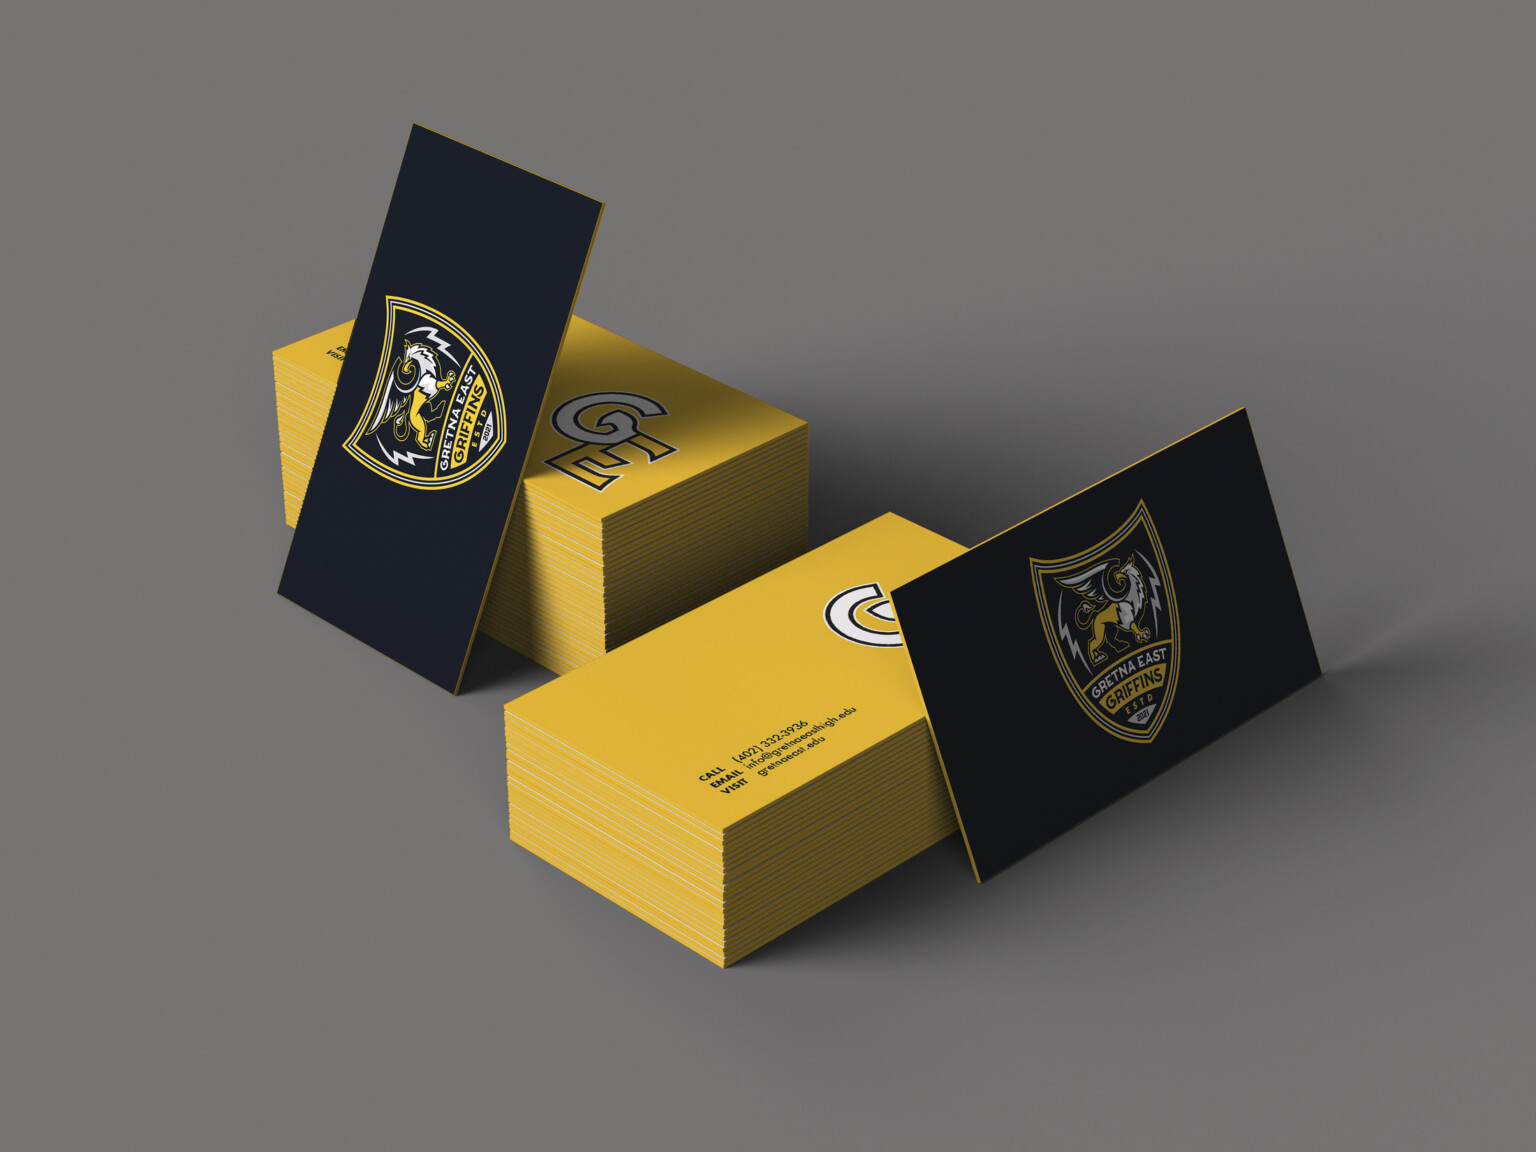 Black and yellow business cards with Gretna East High School logo on black side